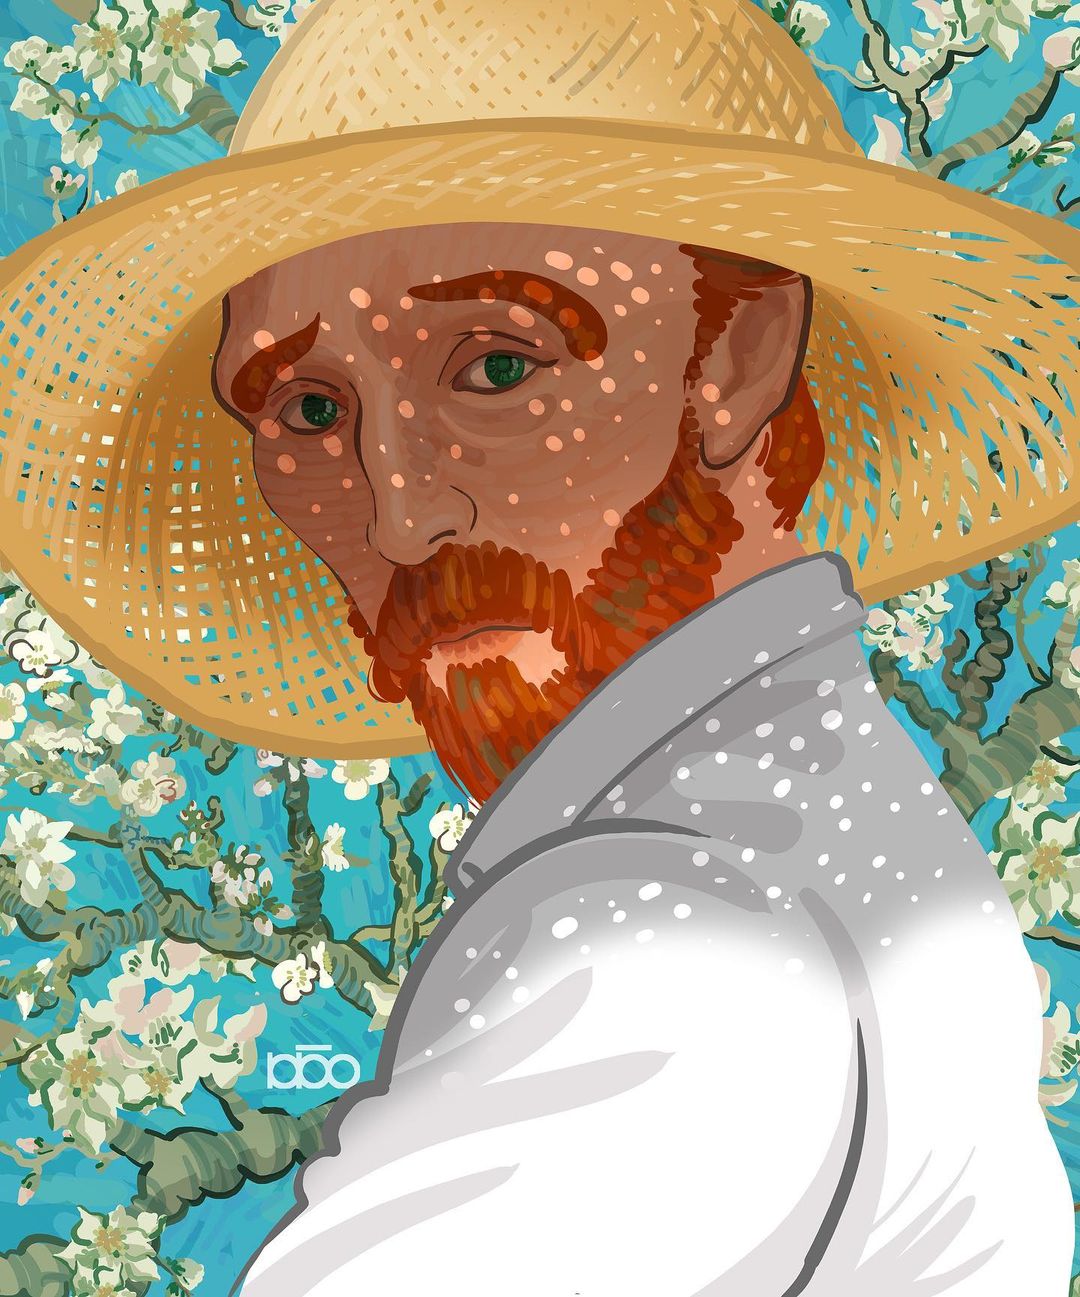 Vincent Van Goghs Life Recreated In His Own Art Style By Alireza Karimi Moghaddam 26